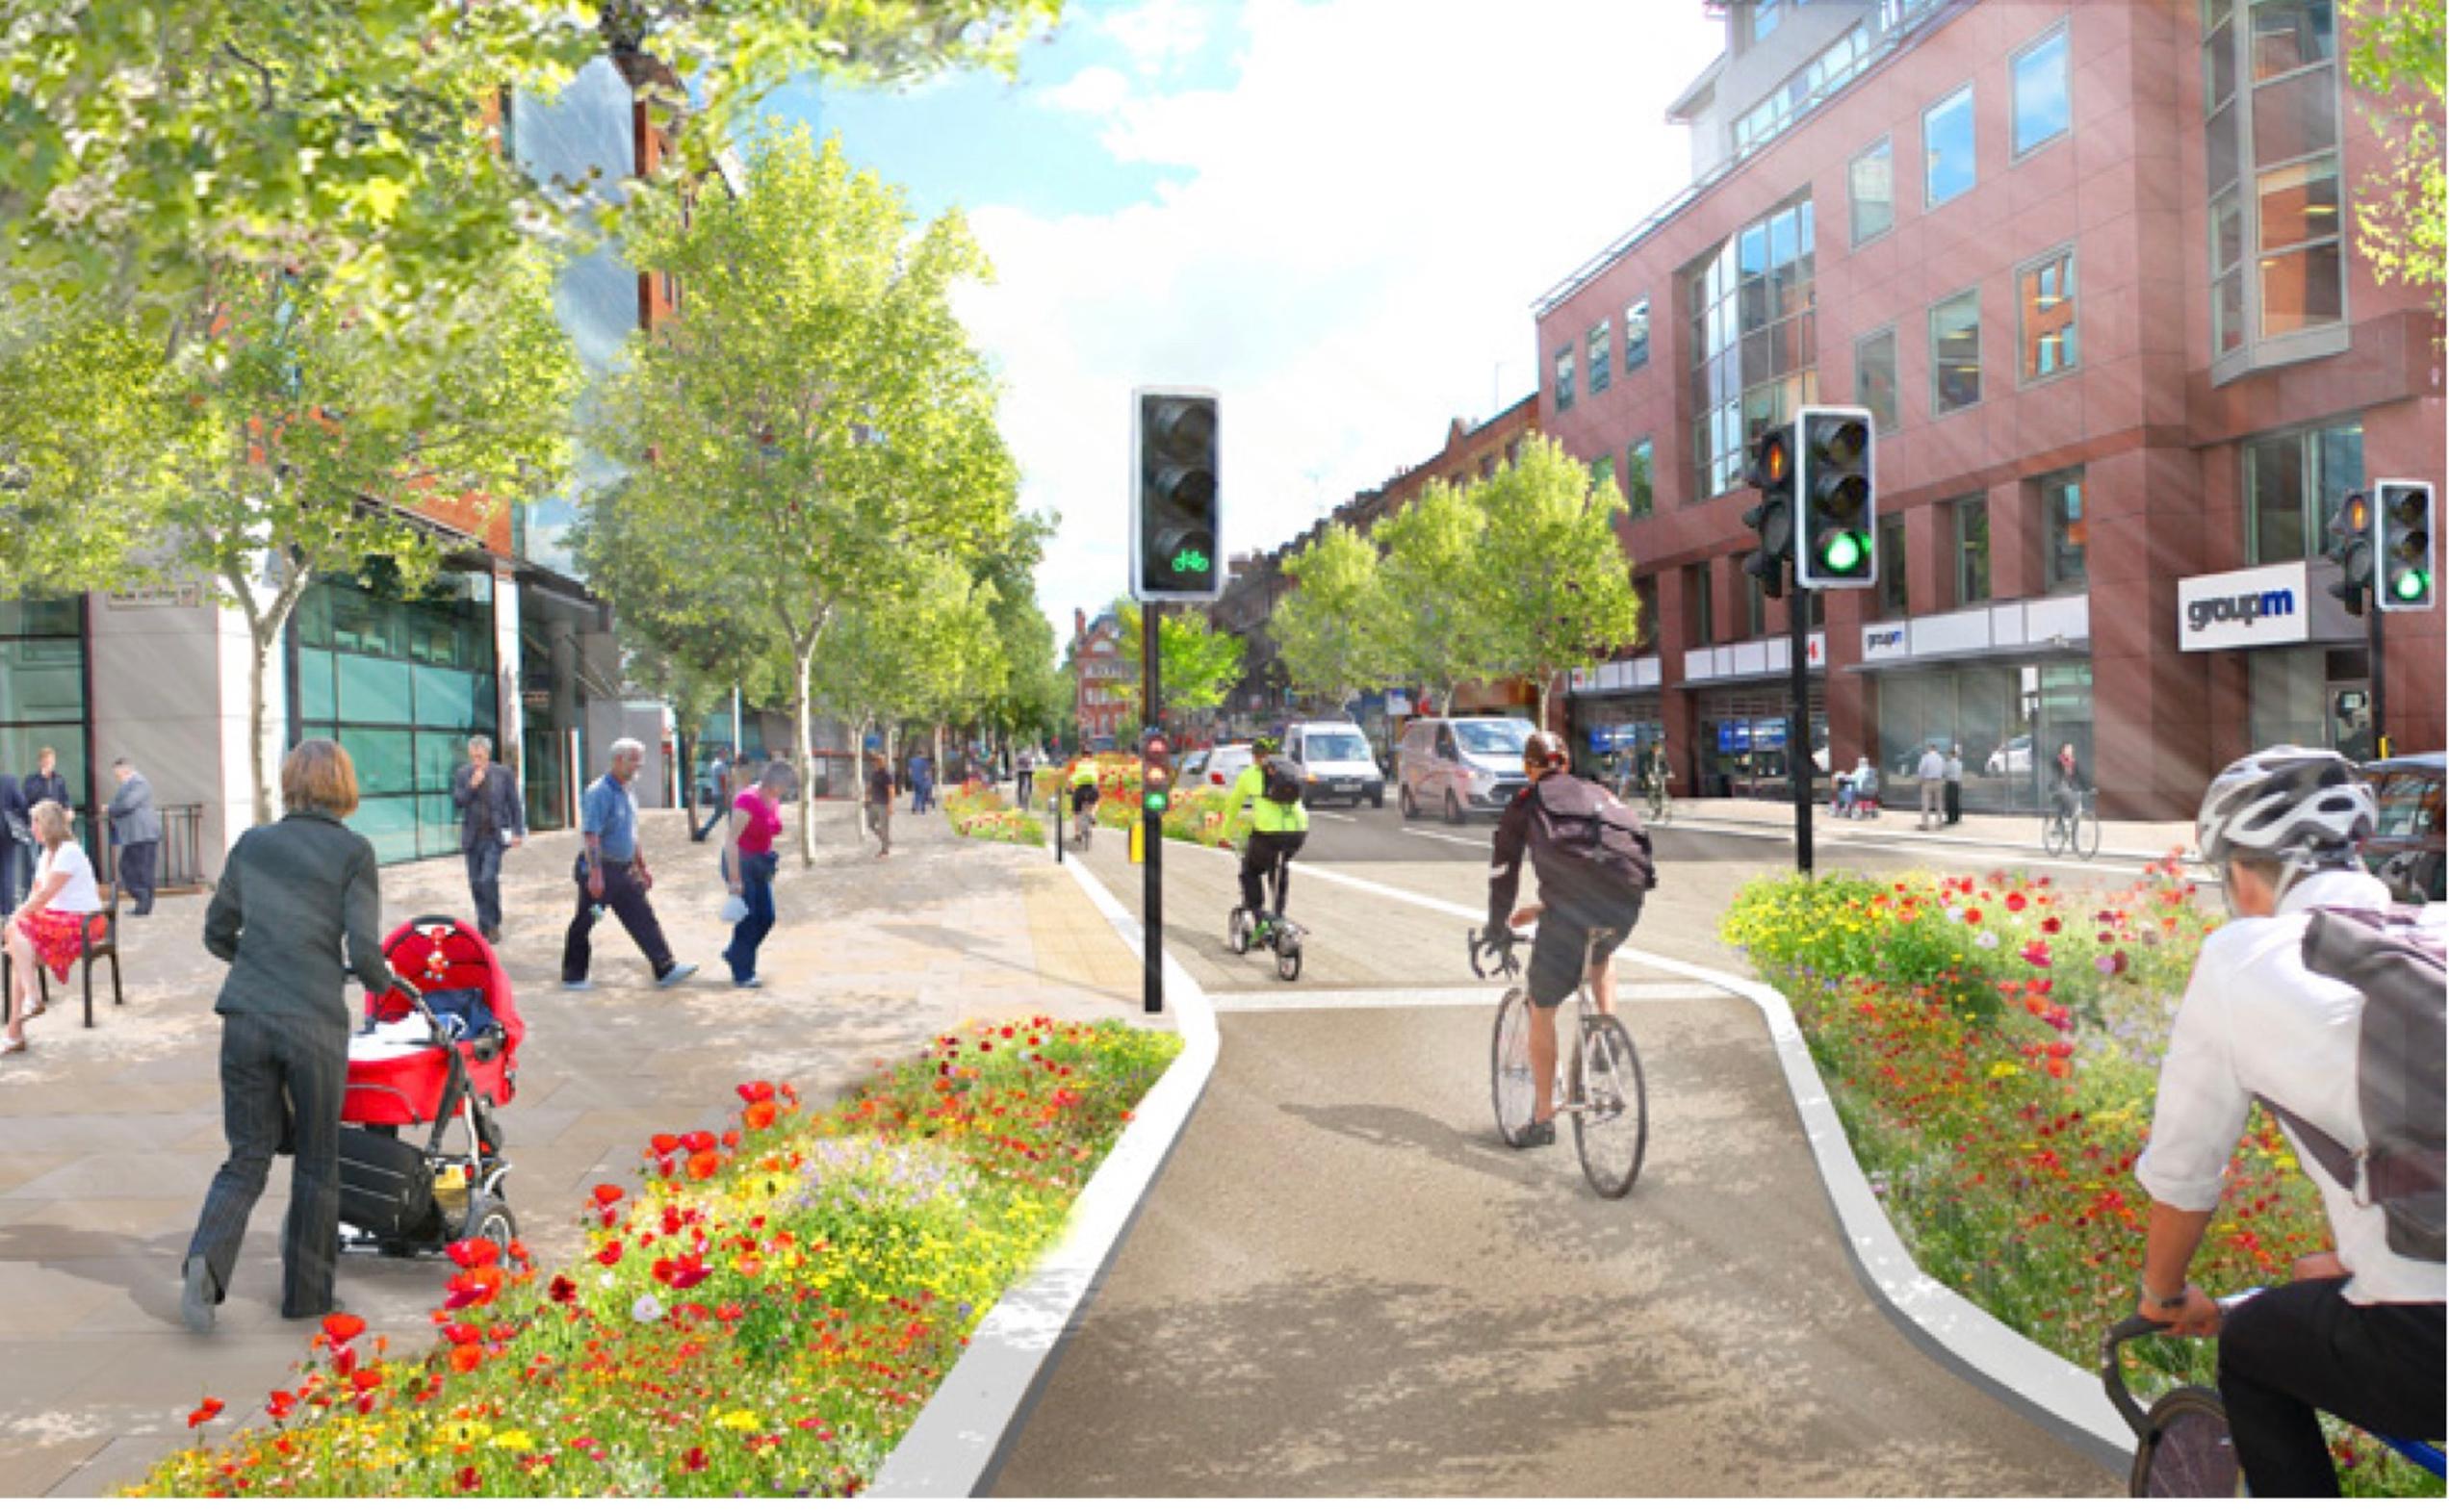 Proposed changes to Theobalds Rd including segregated cycle lanes, floating bus stops and seating and planting